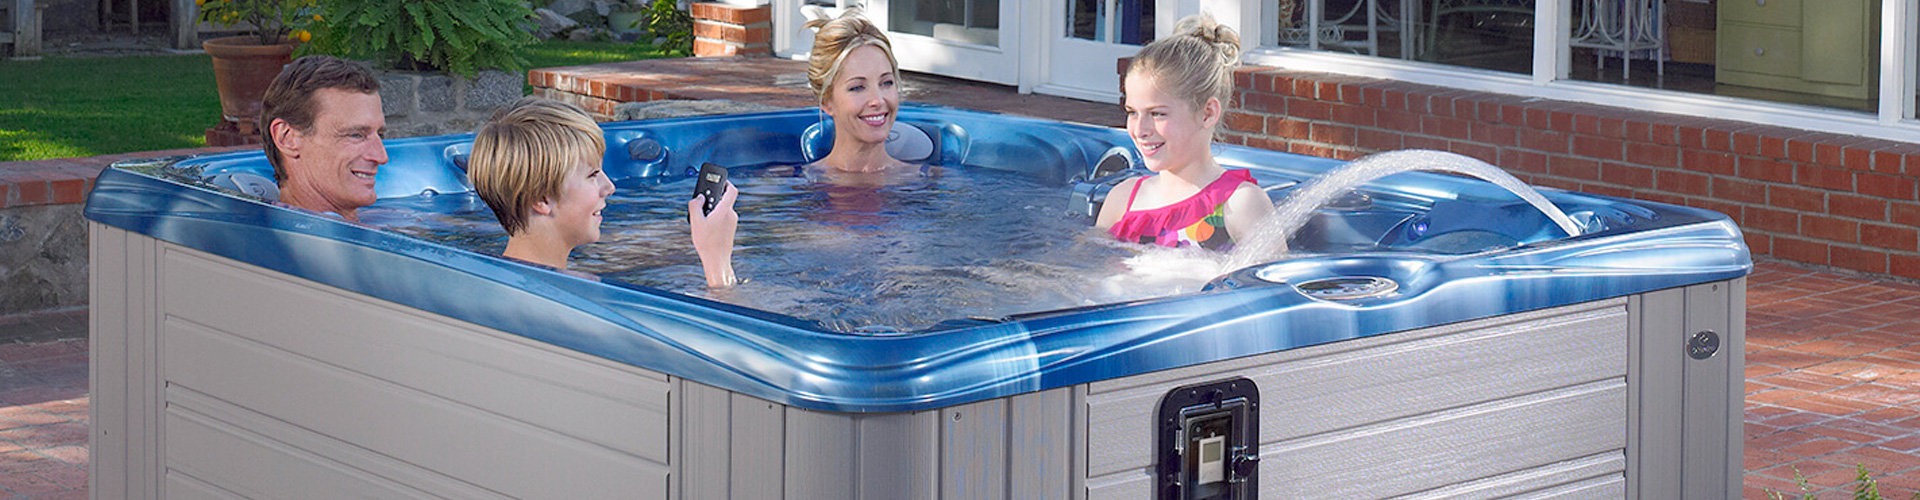 Spa Store Near Steamboat Springs, Shares 3 Benefits of Hot Tub Ownership